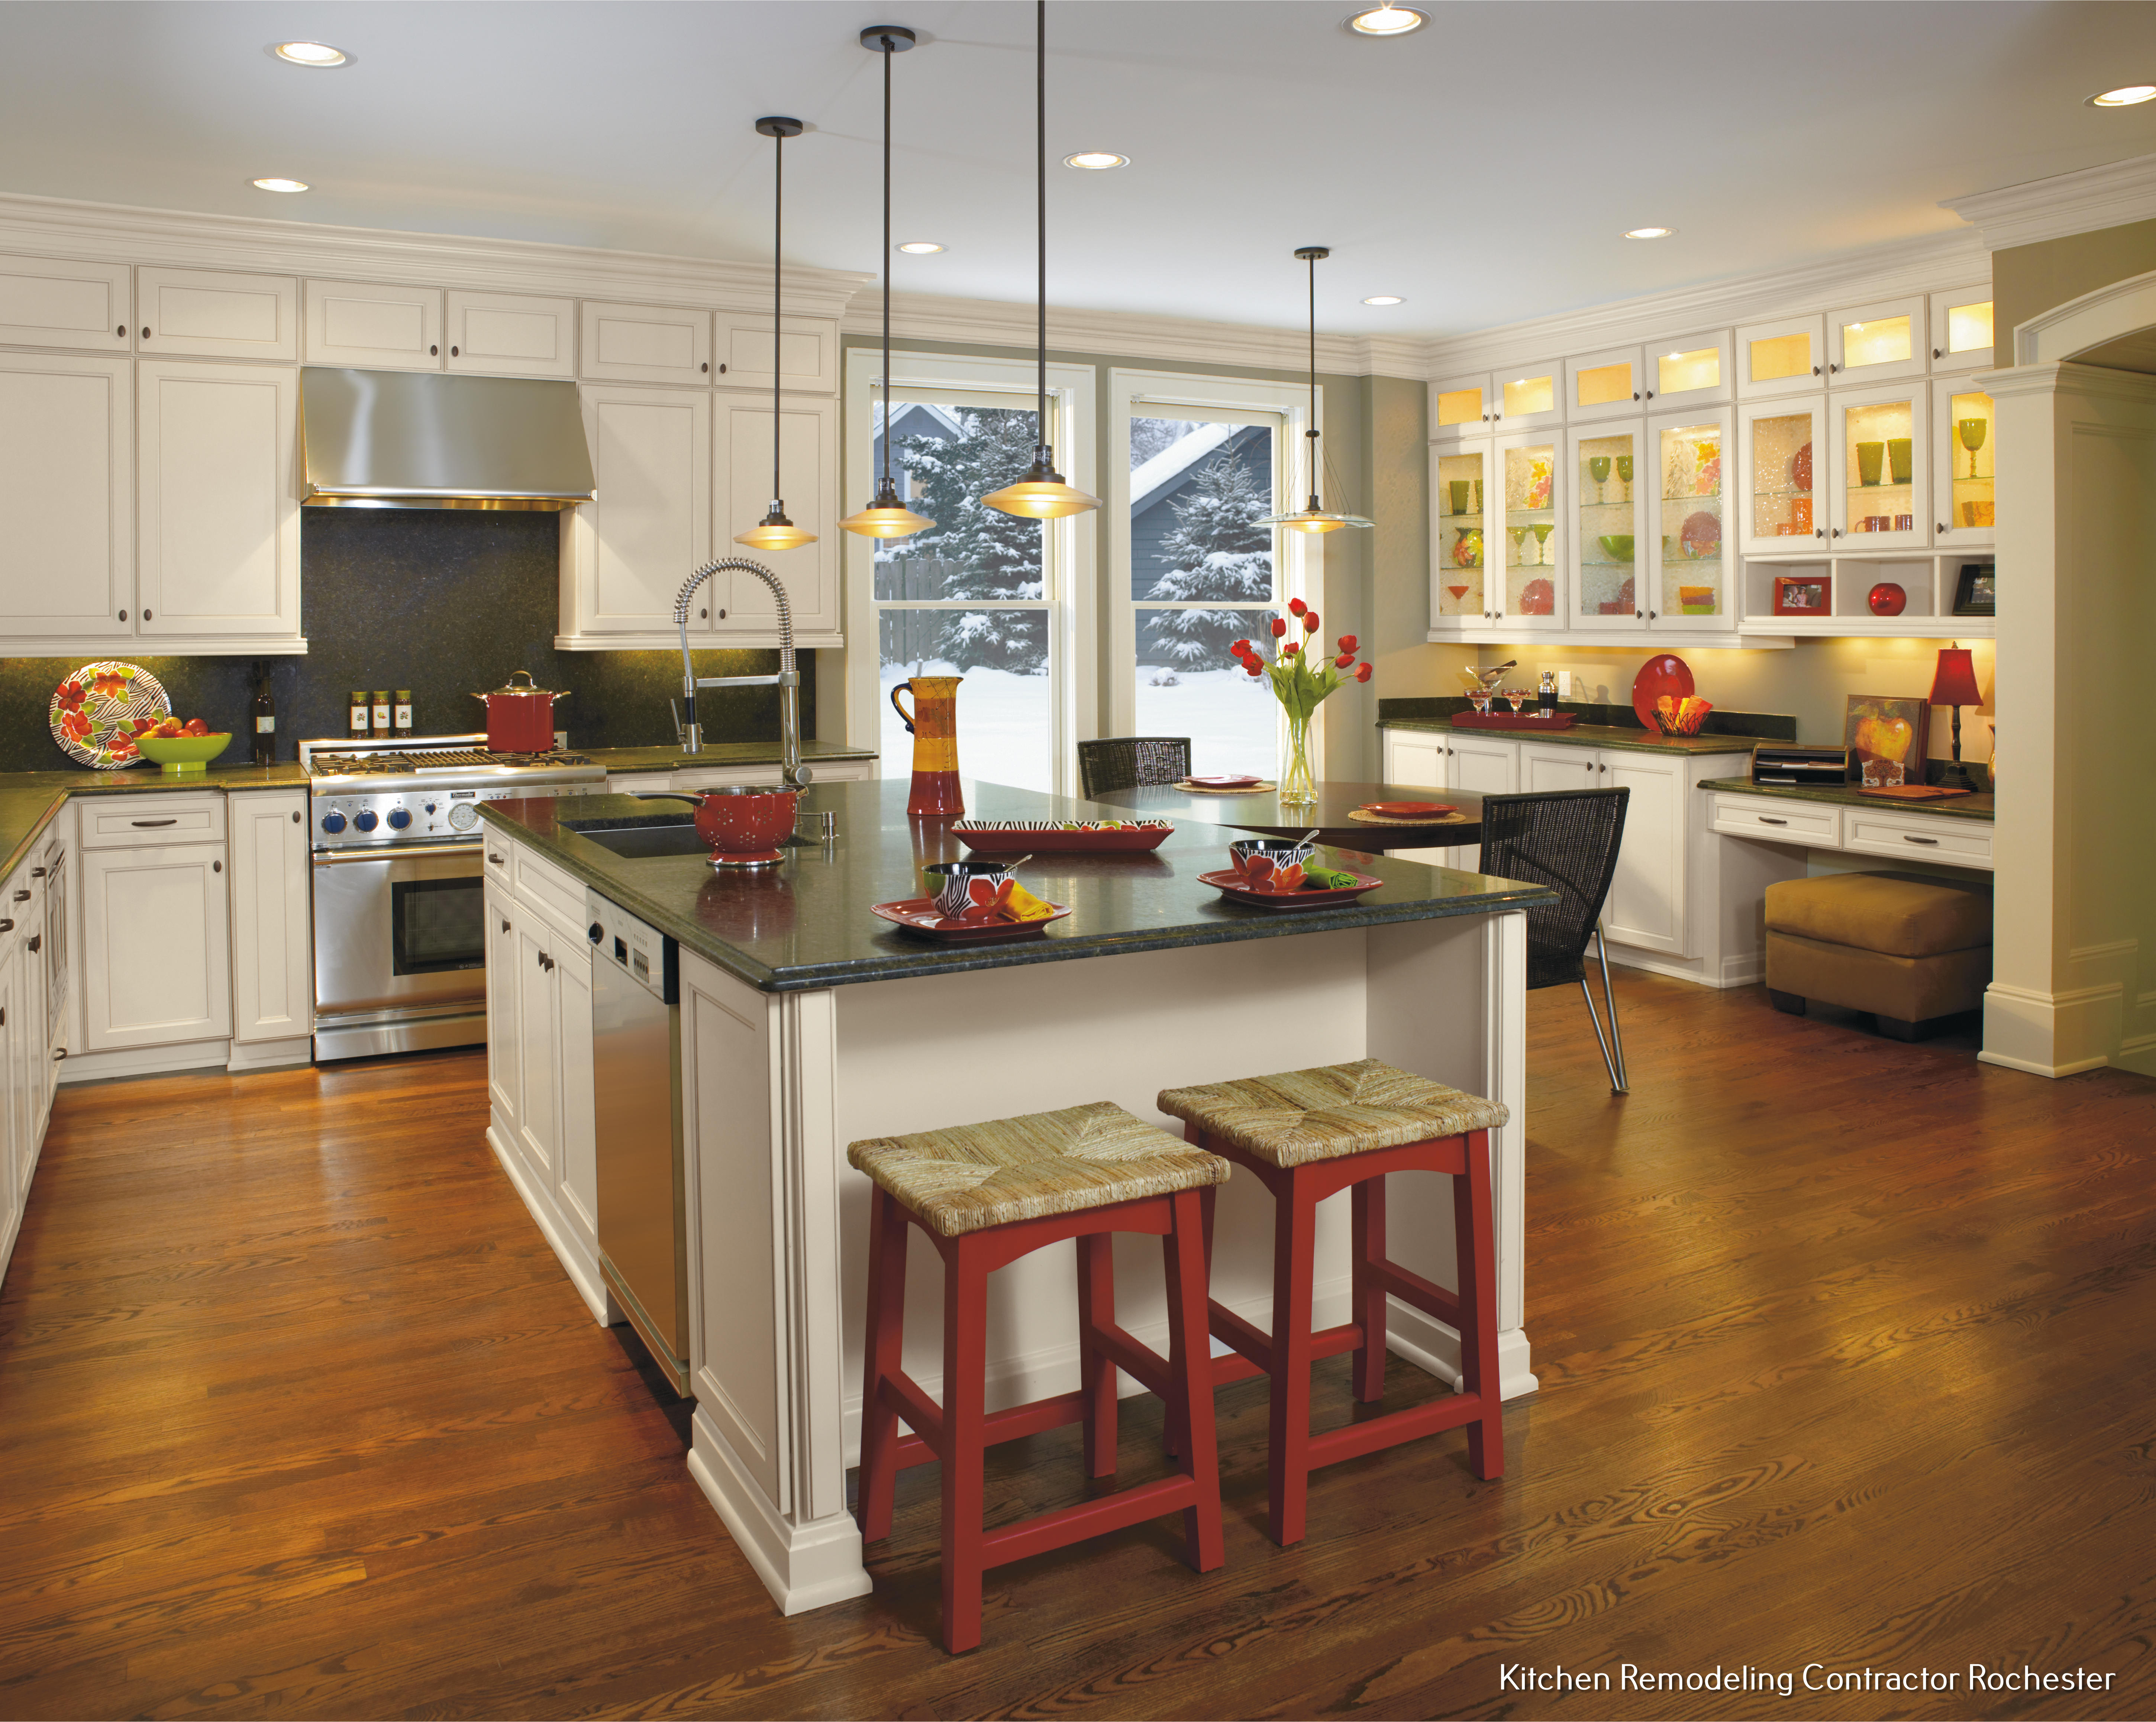 Kitchens By Premier Shares Suggestions for a Profitable Kitchen Transform